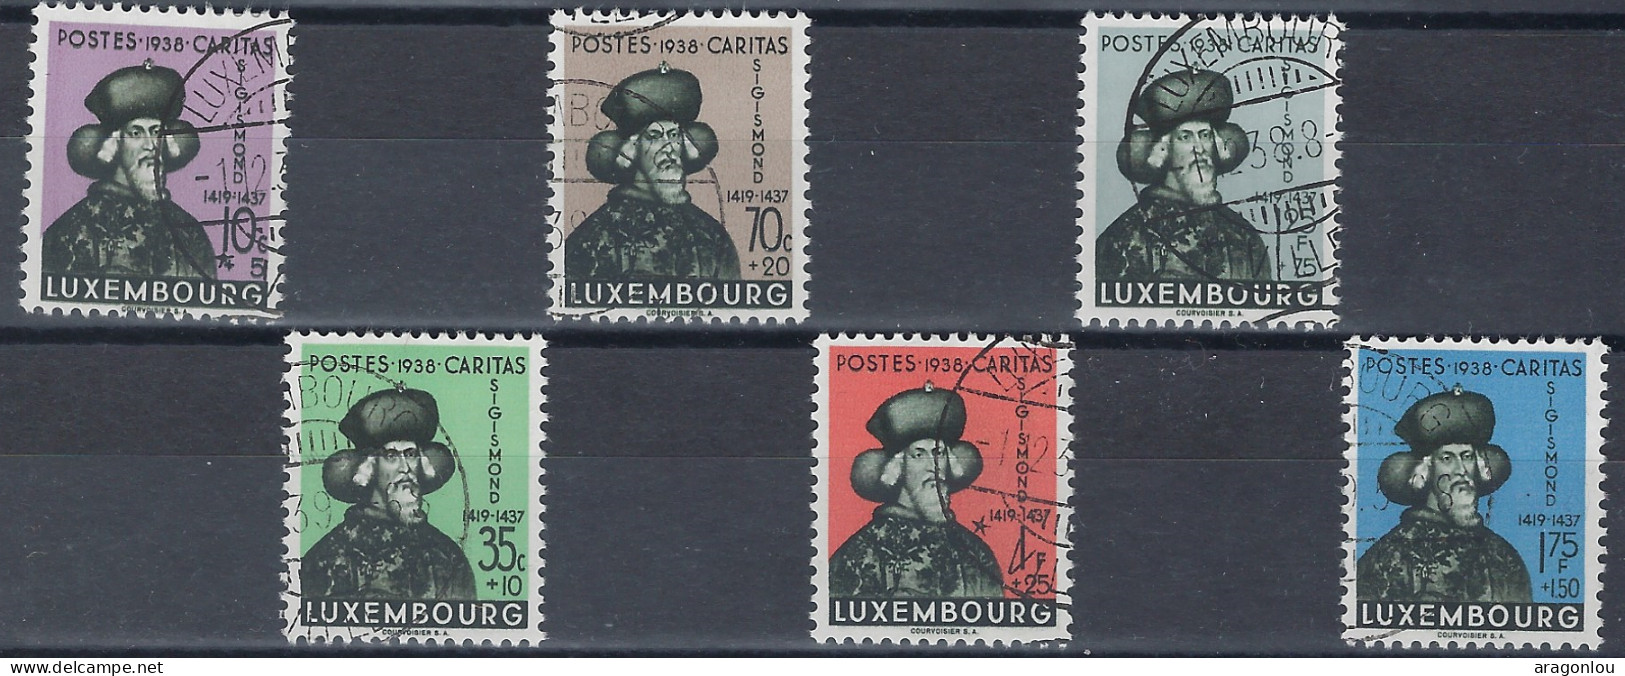 Luxembourg - Luxemburrg - Timbres  1938   Sigismund   Série   ° - Usados